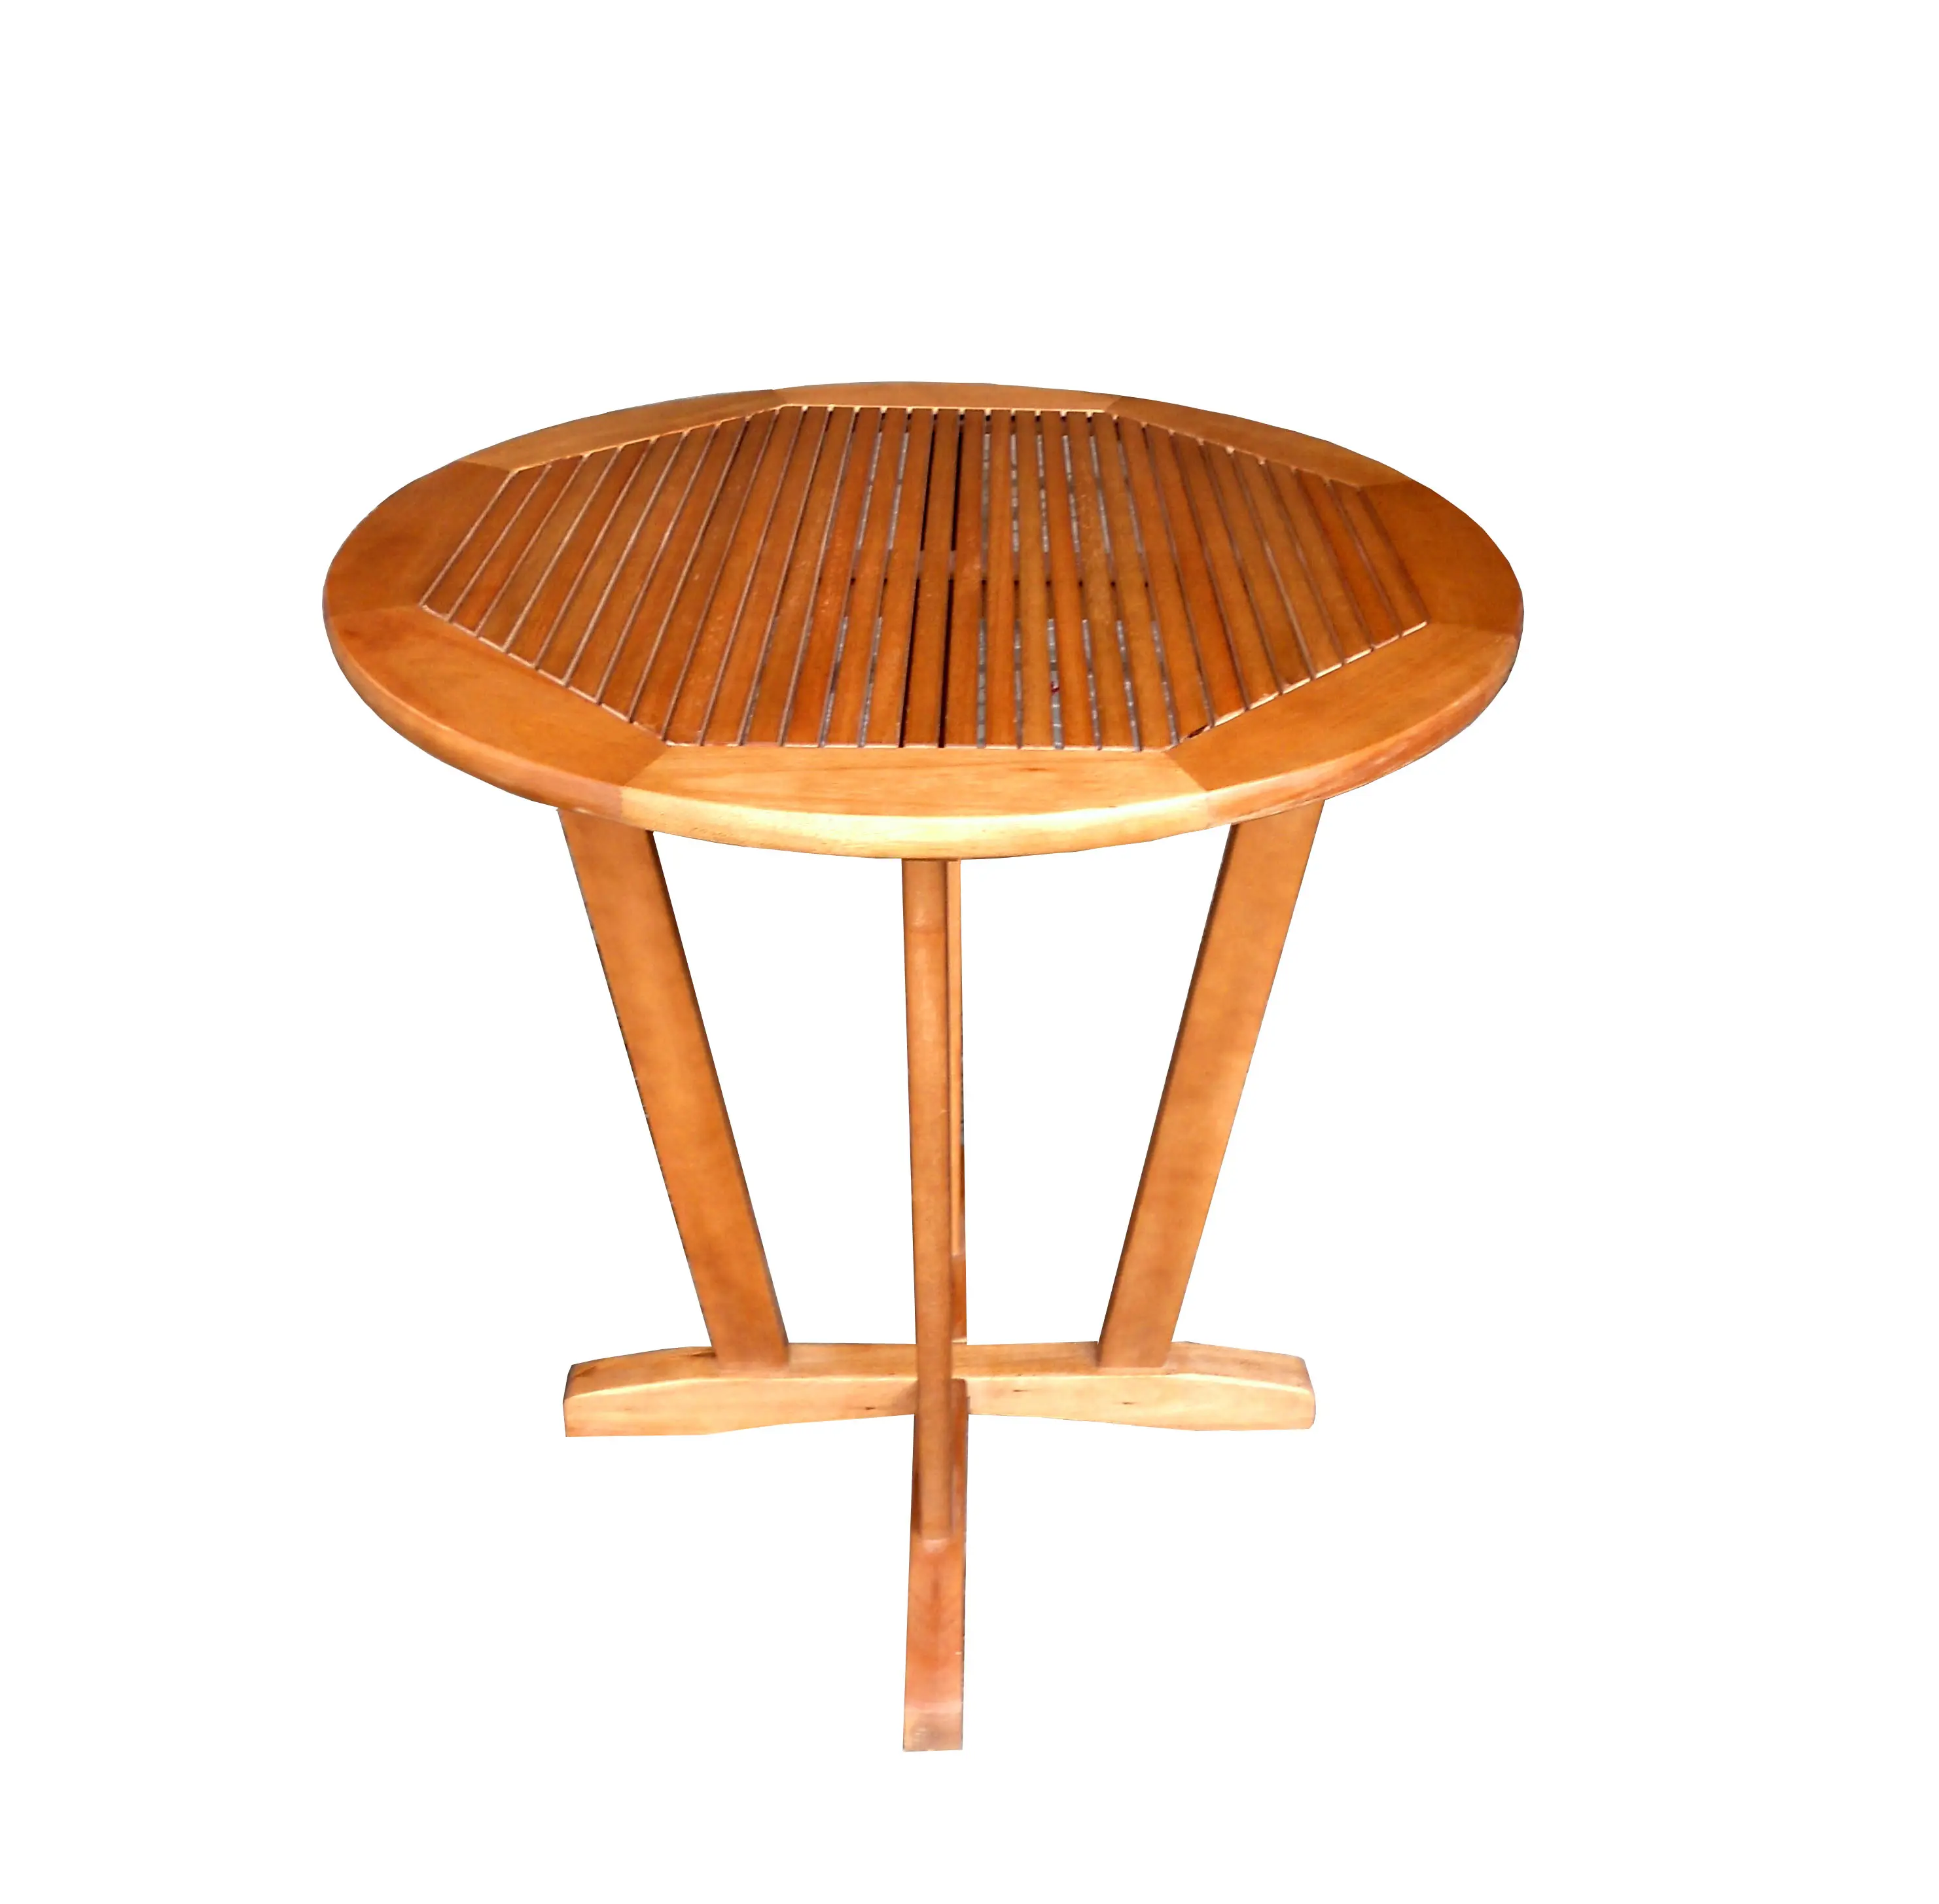 Nghia Son Furniture Modern Solid Wood Outdoor Table round Shape with Vietnam Origin Available for Shipment